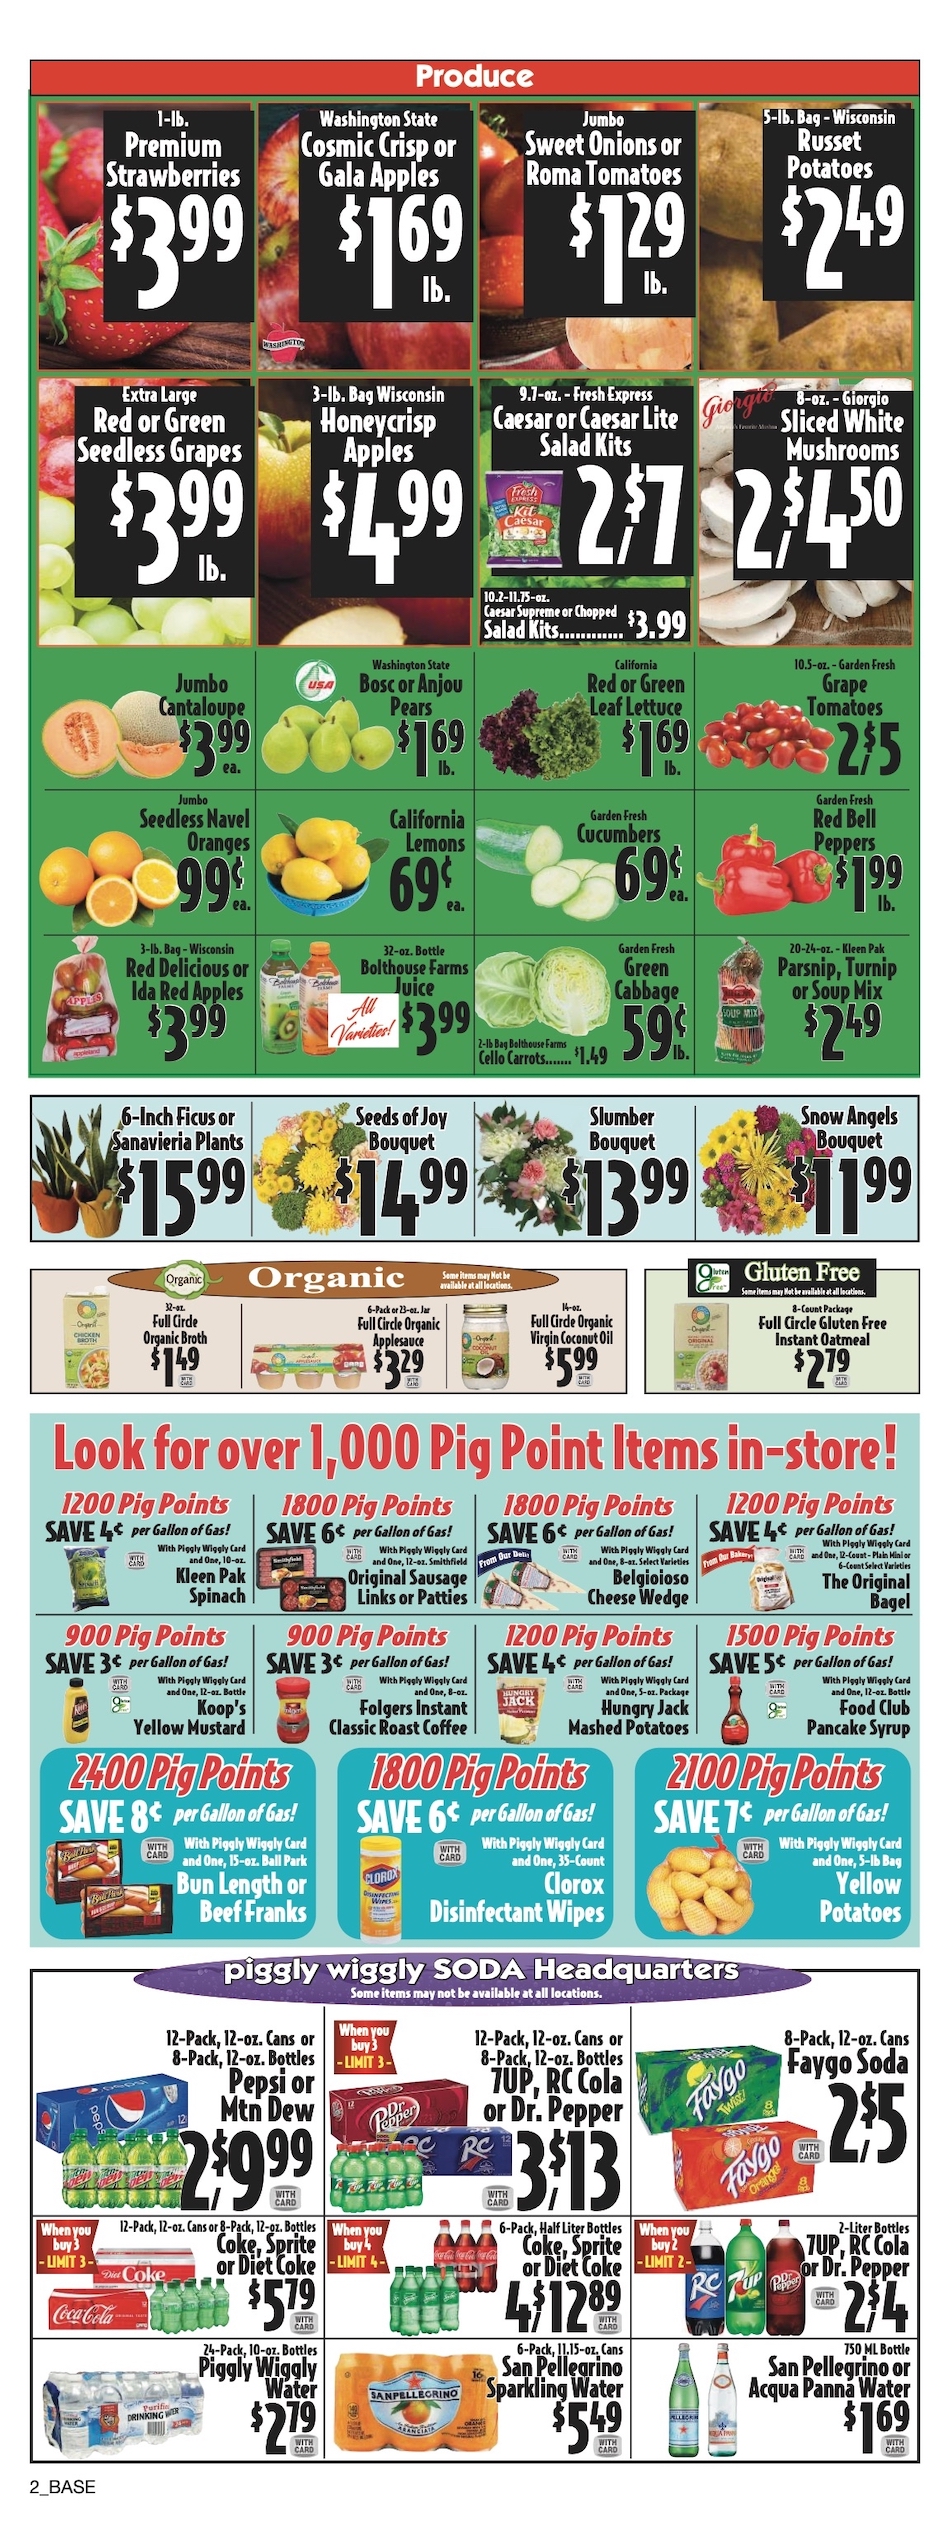 Piggly Wiggly Ad